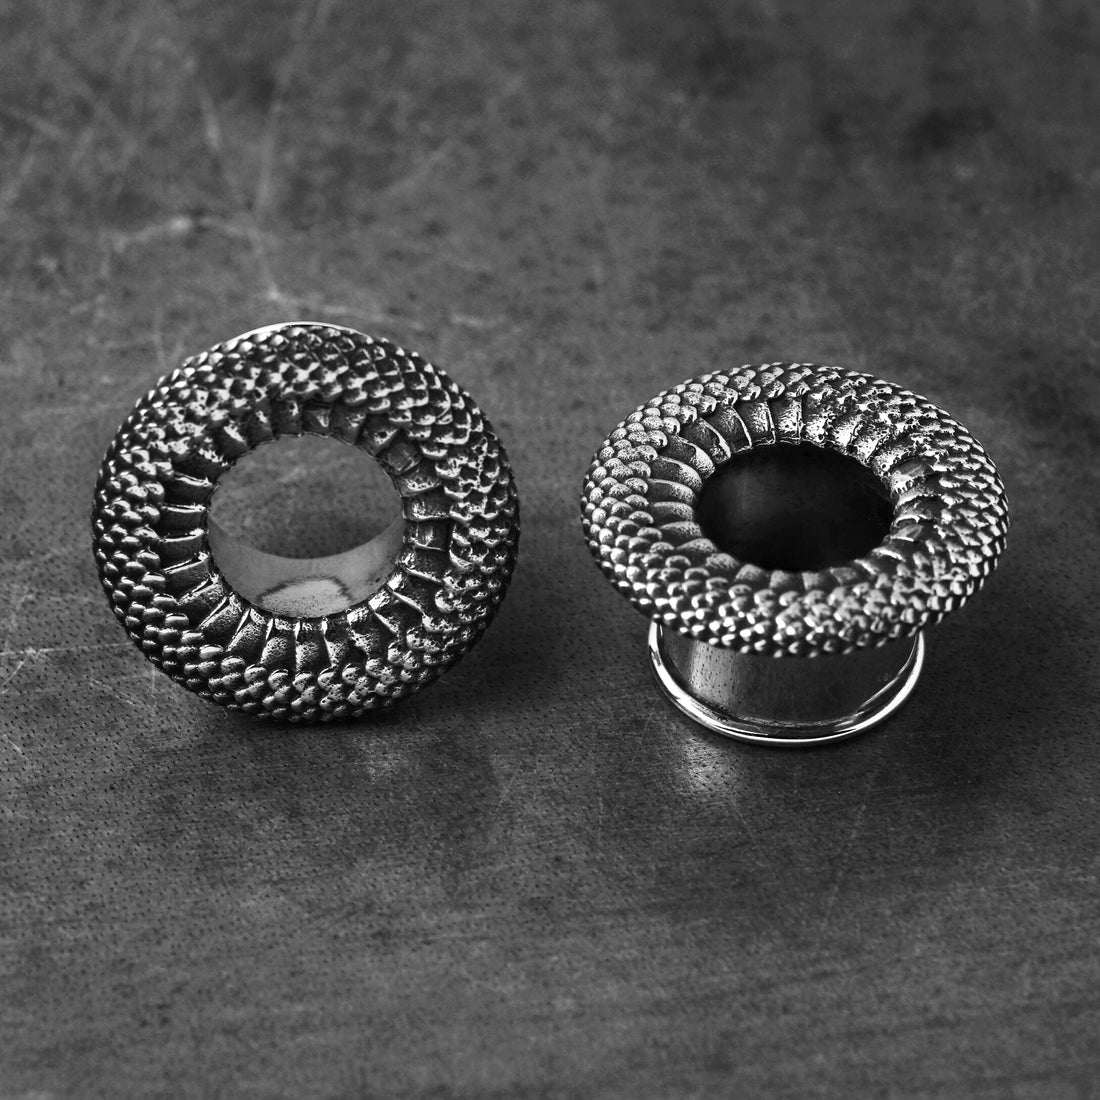 Snakes skin texture silver plug tunnels